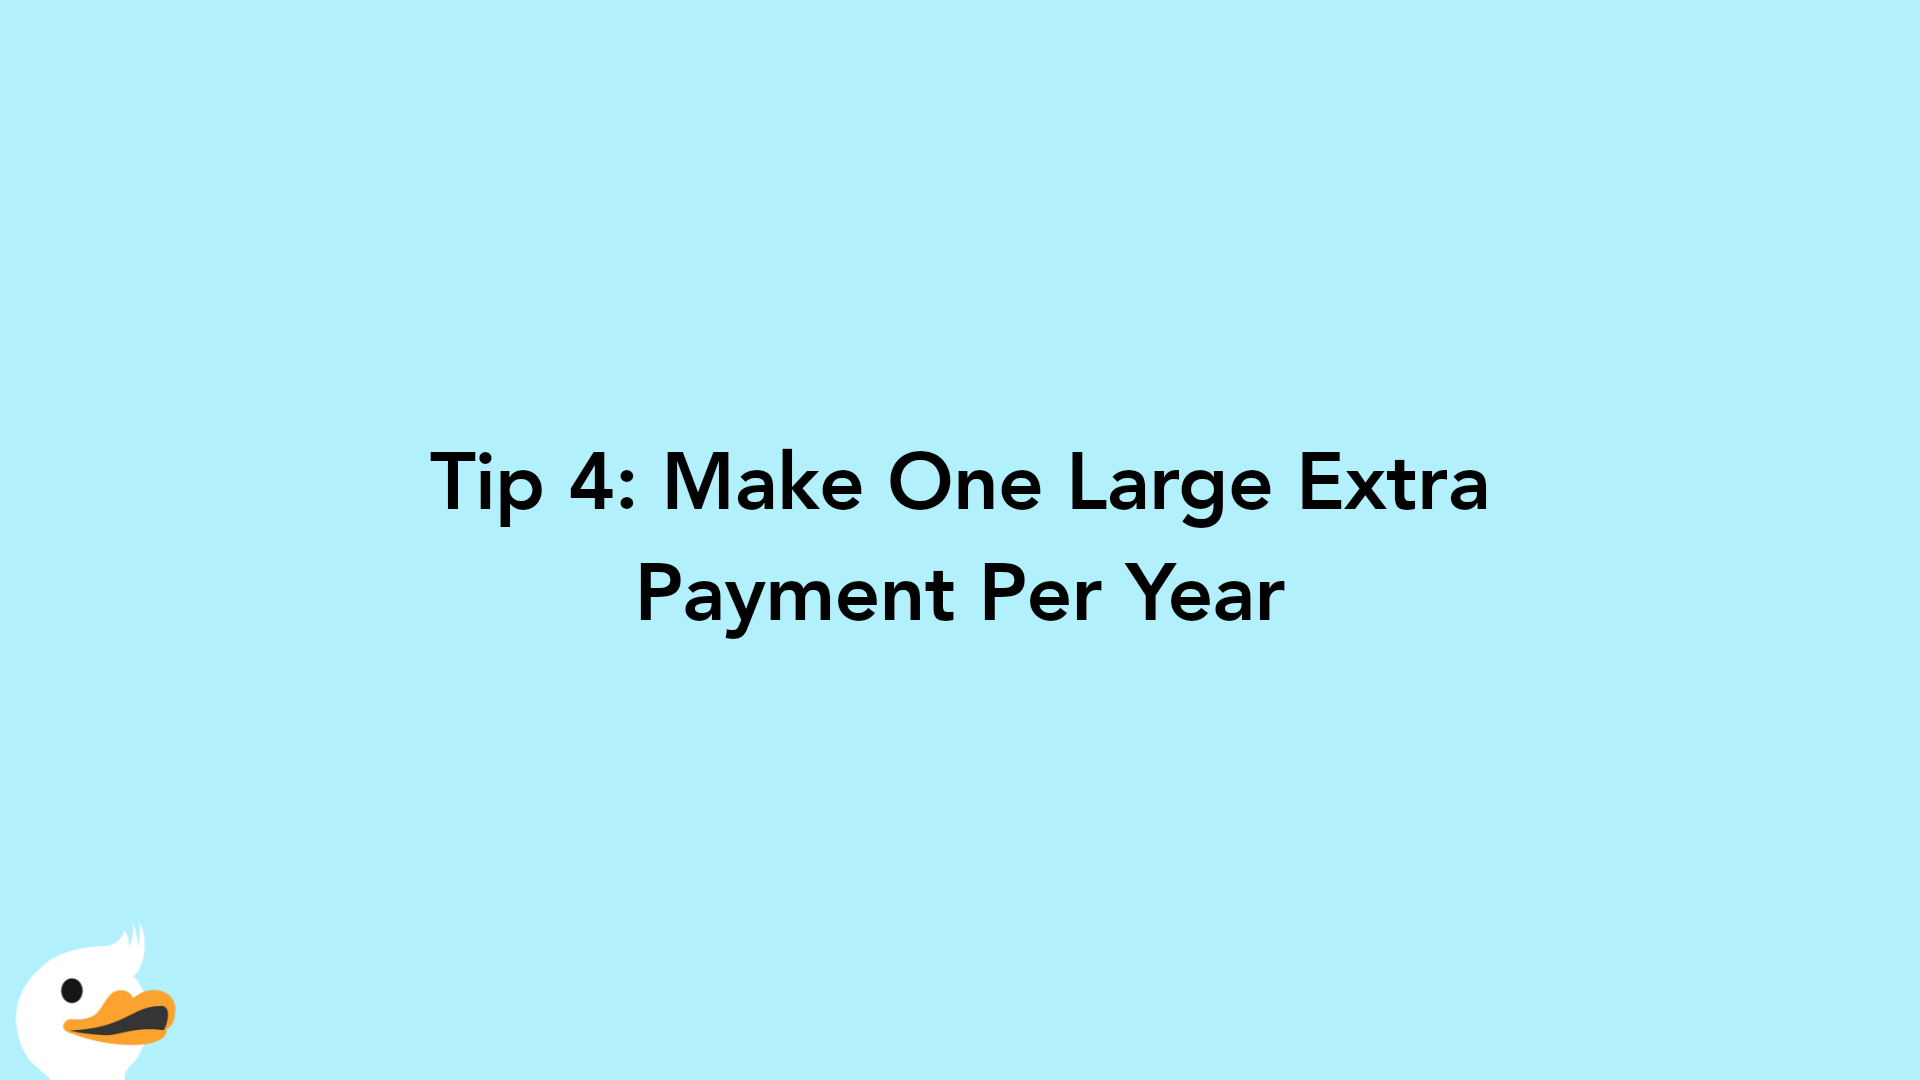 Tip 4: Make One Large Extra Payment Per Year